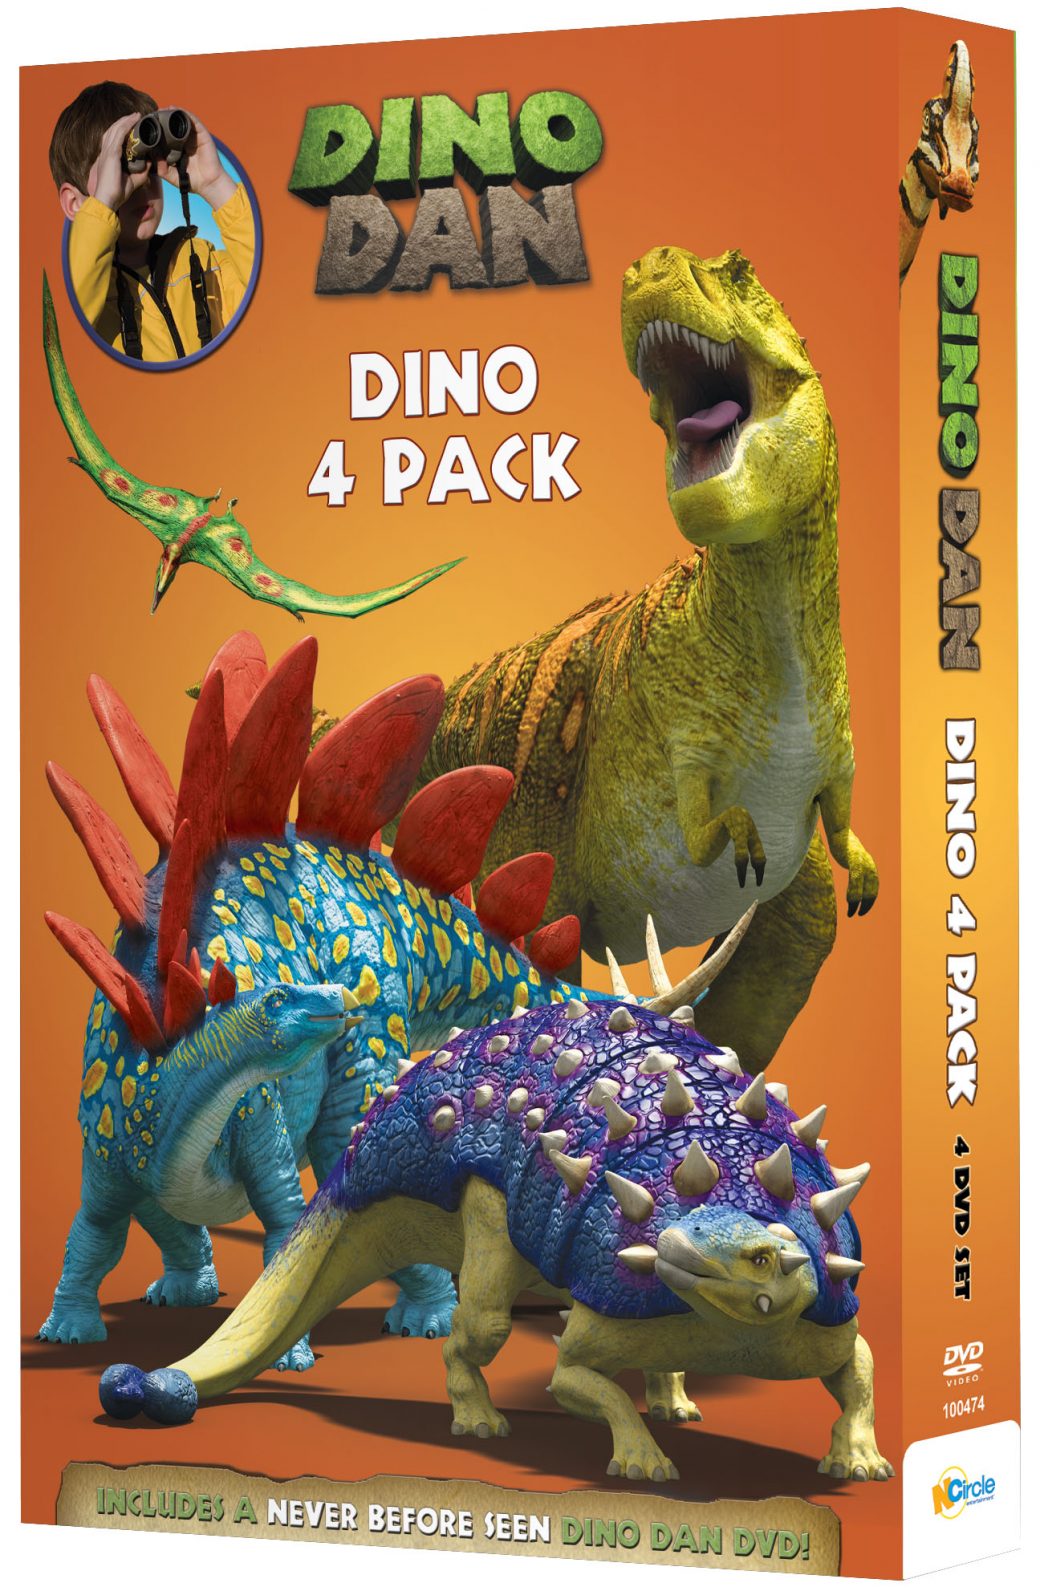 DINO DAN DVD Four Pack Review/Giveaway - The Chronicles